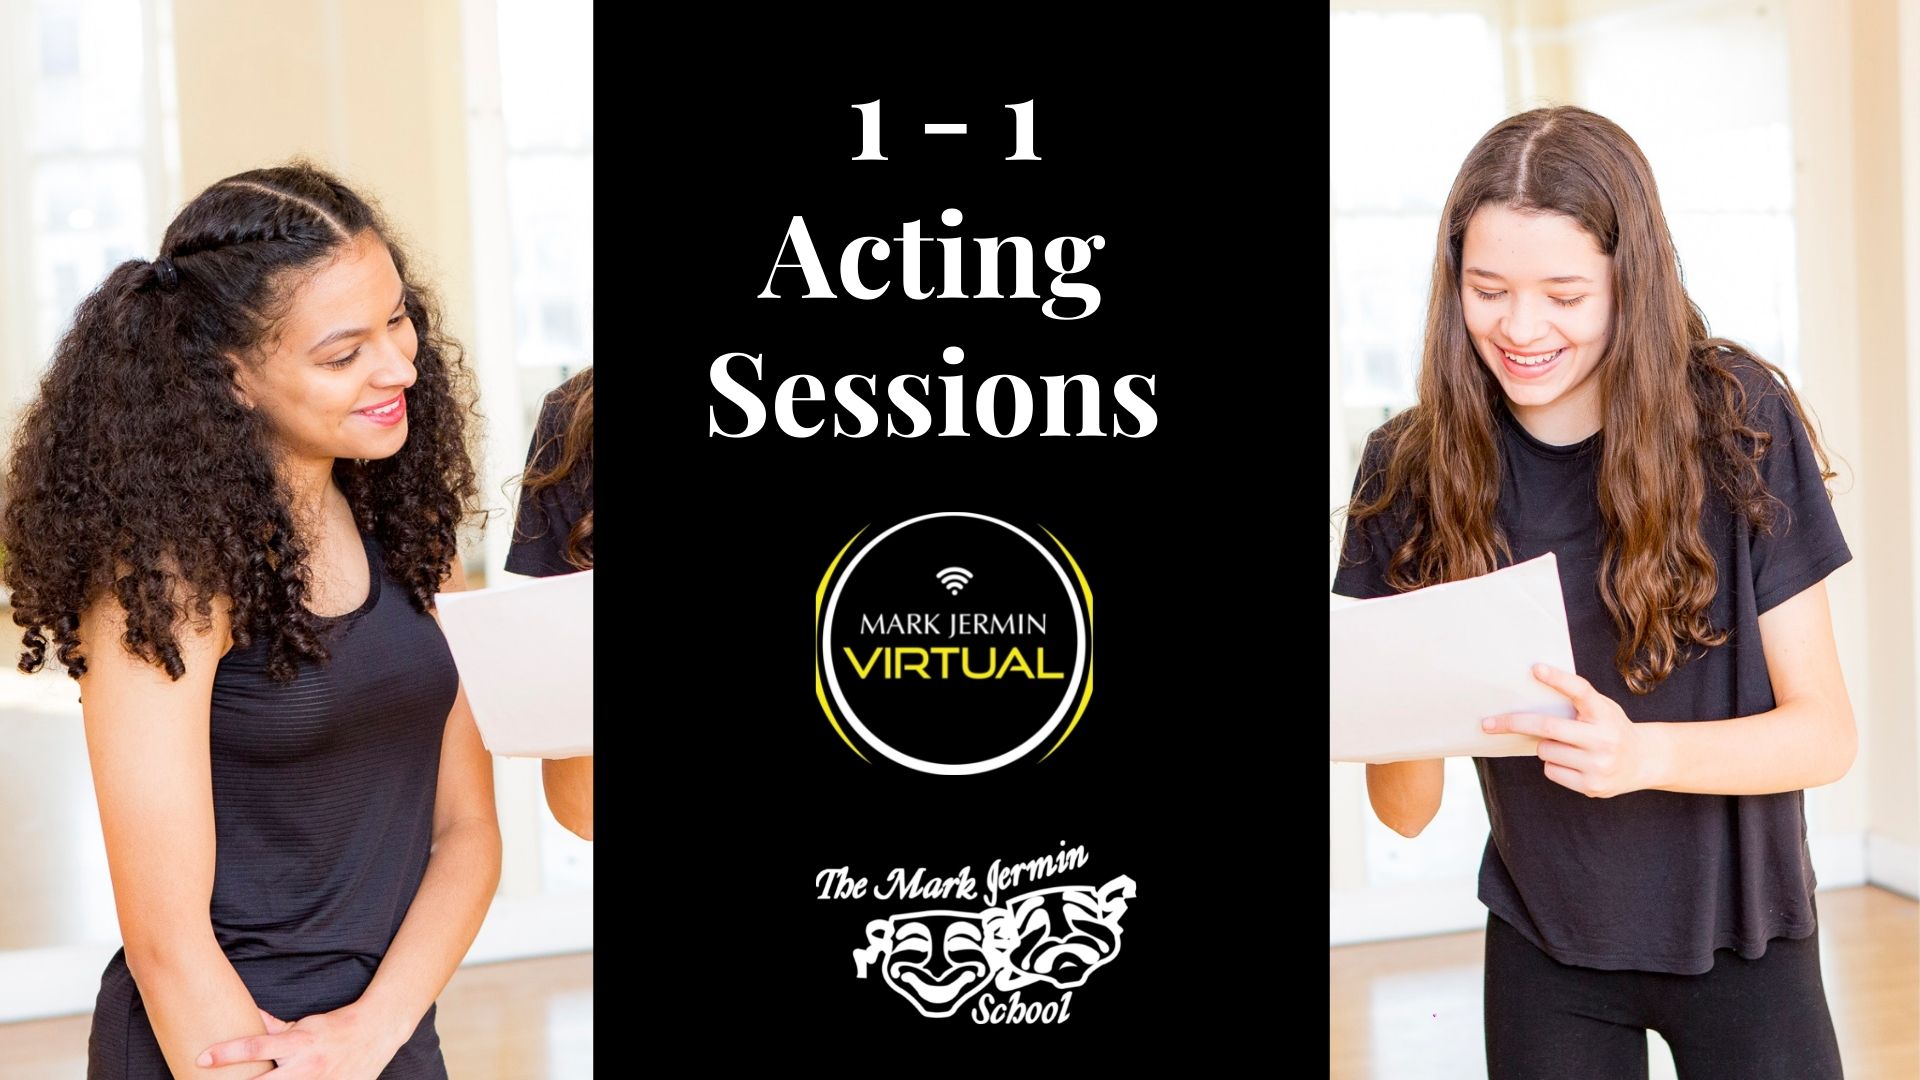 1 - 1 Acting Sessions